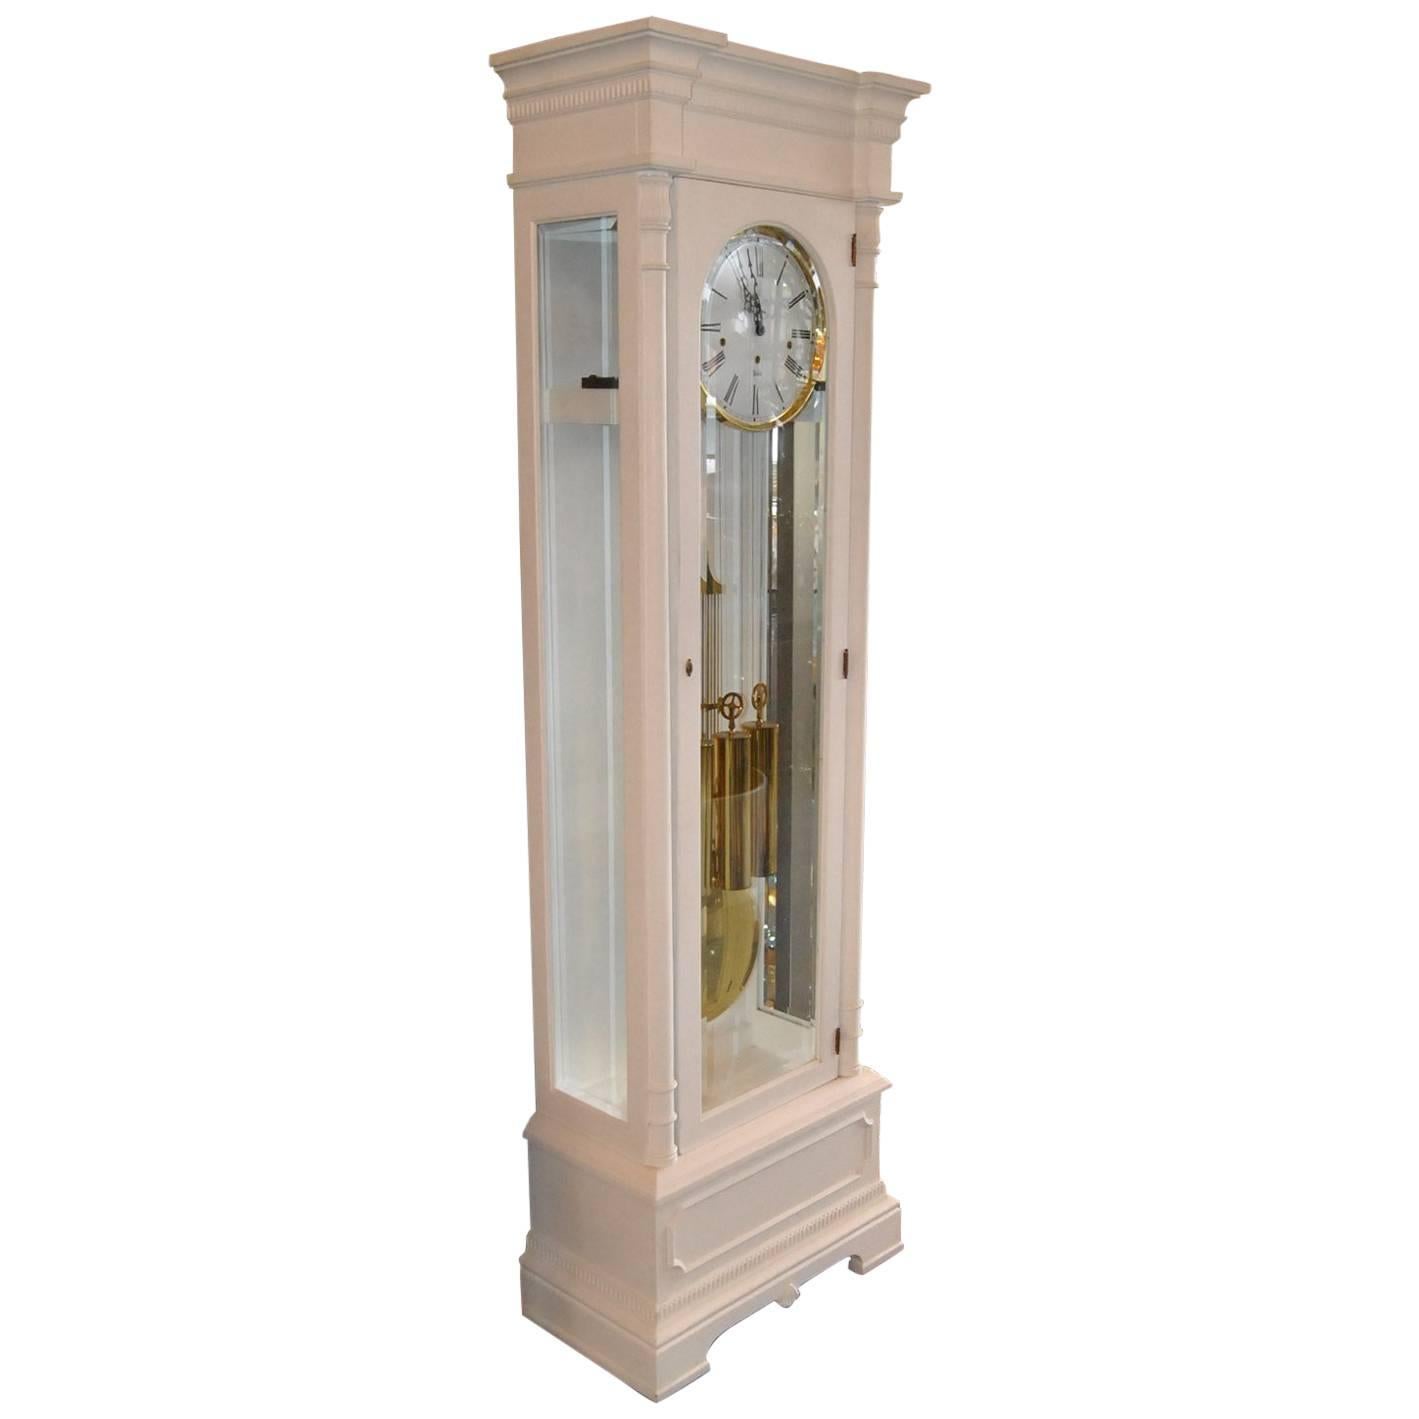 A beautiful Sligh Grandfather Clock in the sought out style, Classic Dorset. This clock has been professionally painted in white. The clock is an eight day key wound clock with triple chimes (Westminster, Whittington, St. Micheals). The round